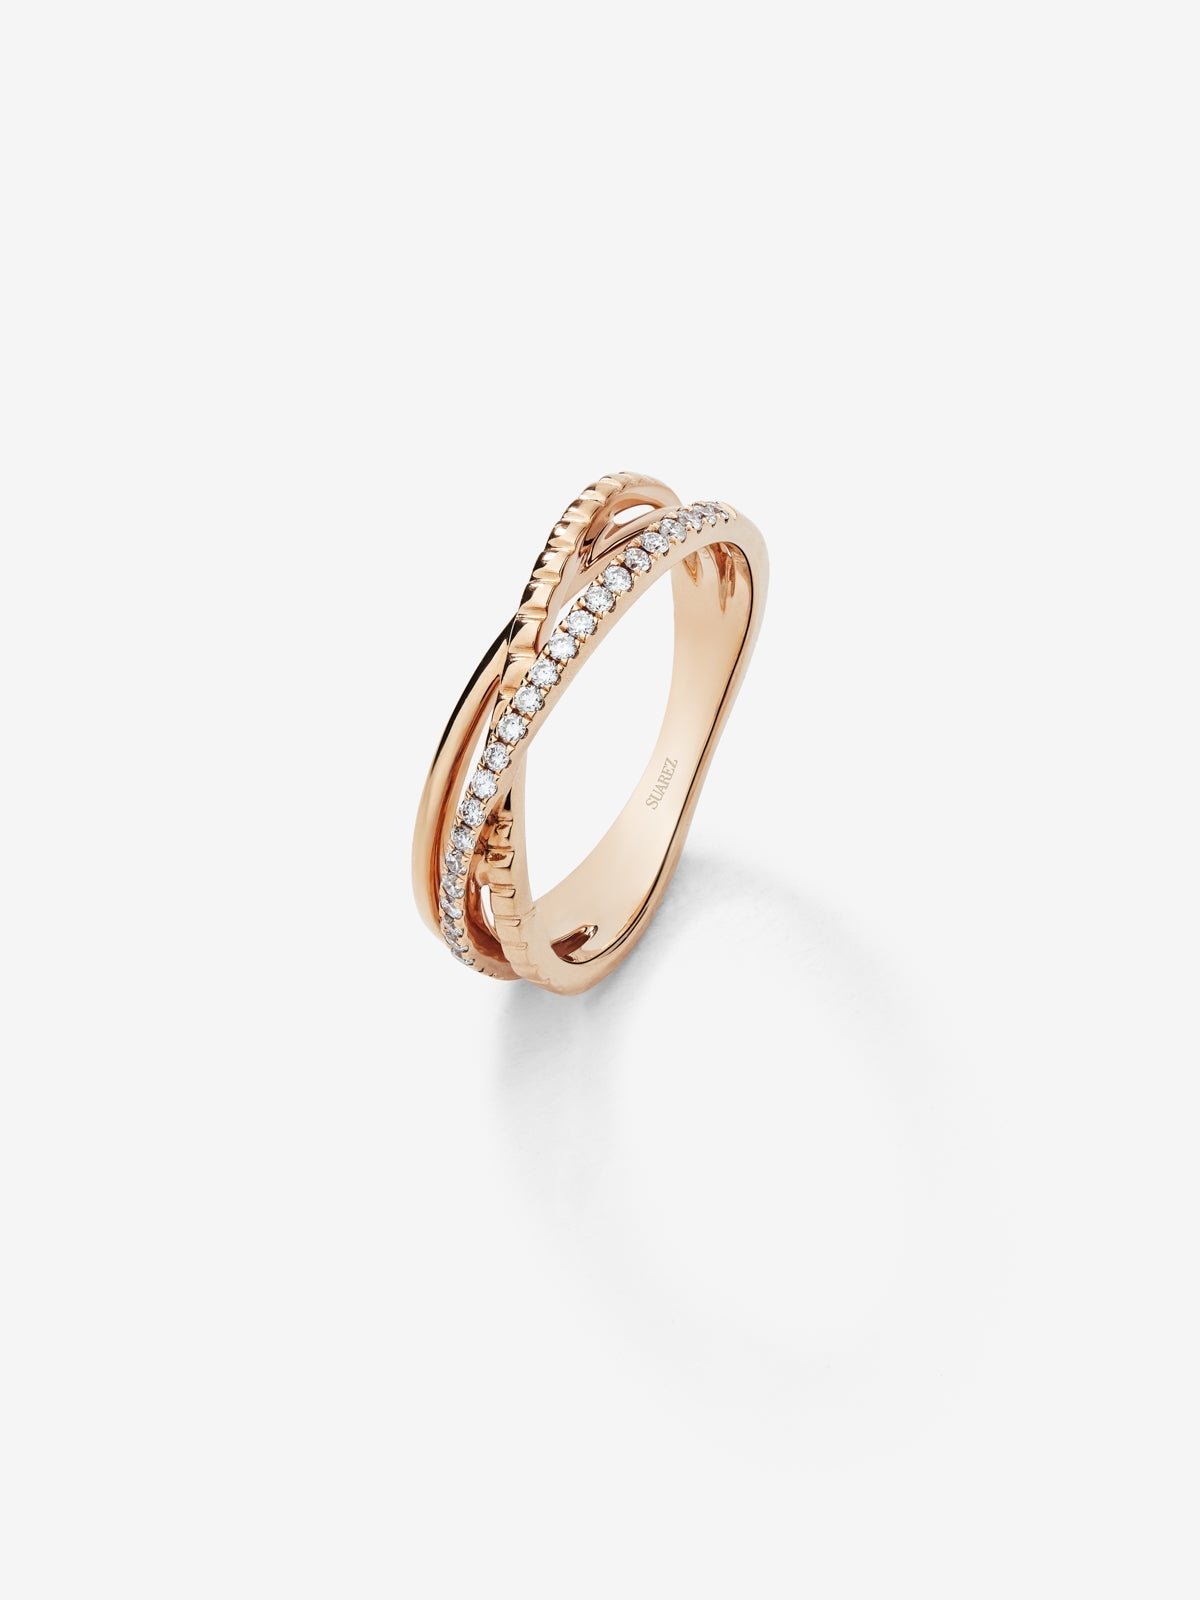 18K rose gold cross ring with 25 brilliant-cut diamonds with a total of 0.15 cts